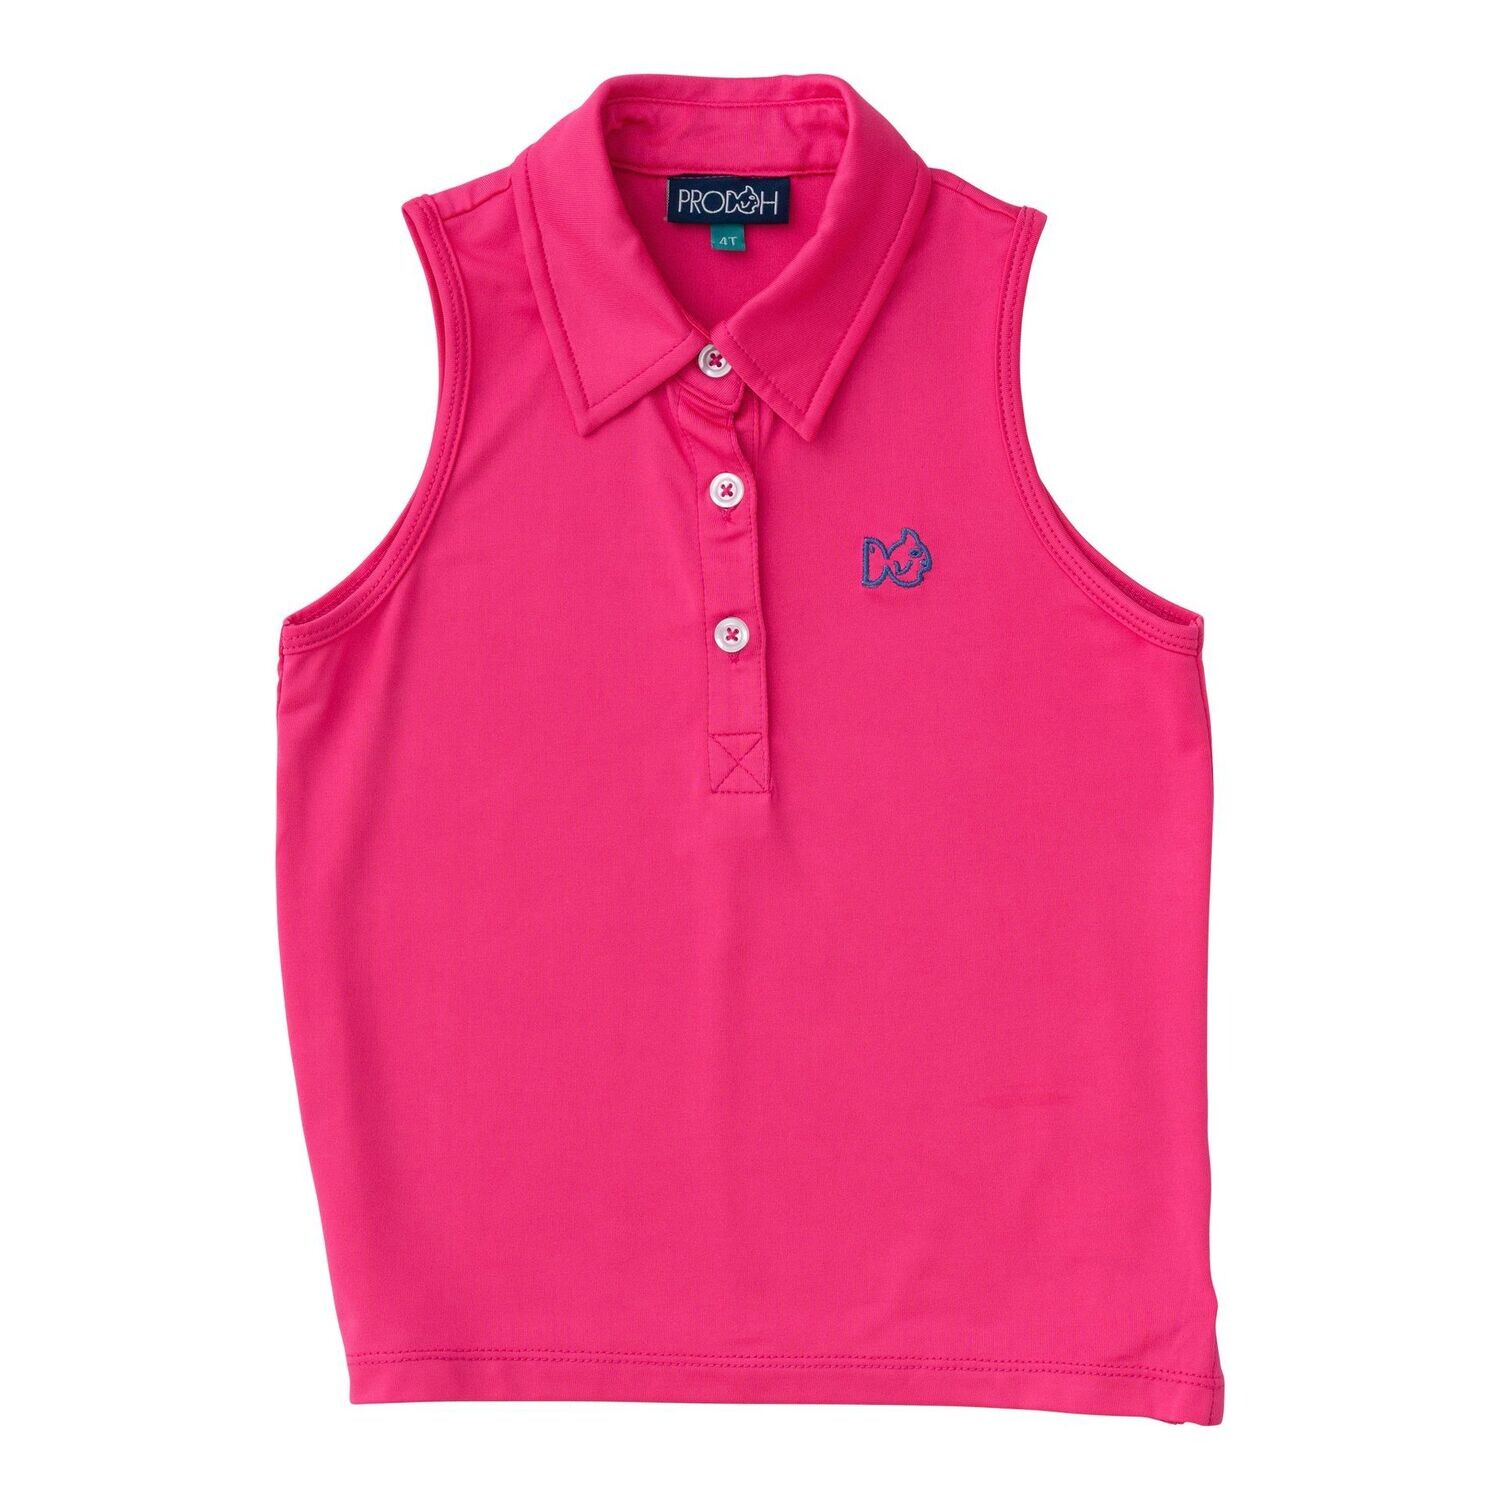 Sleeveless Pro Performance Polo-Cheeky Pink, Size: 2T